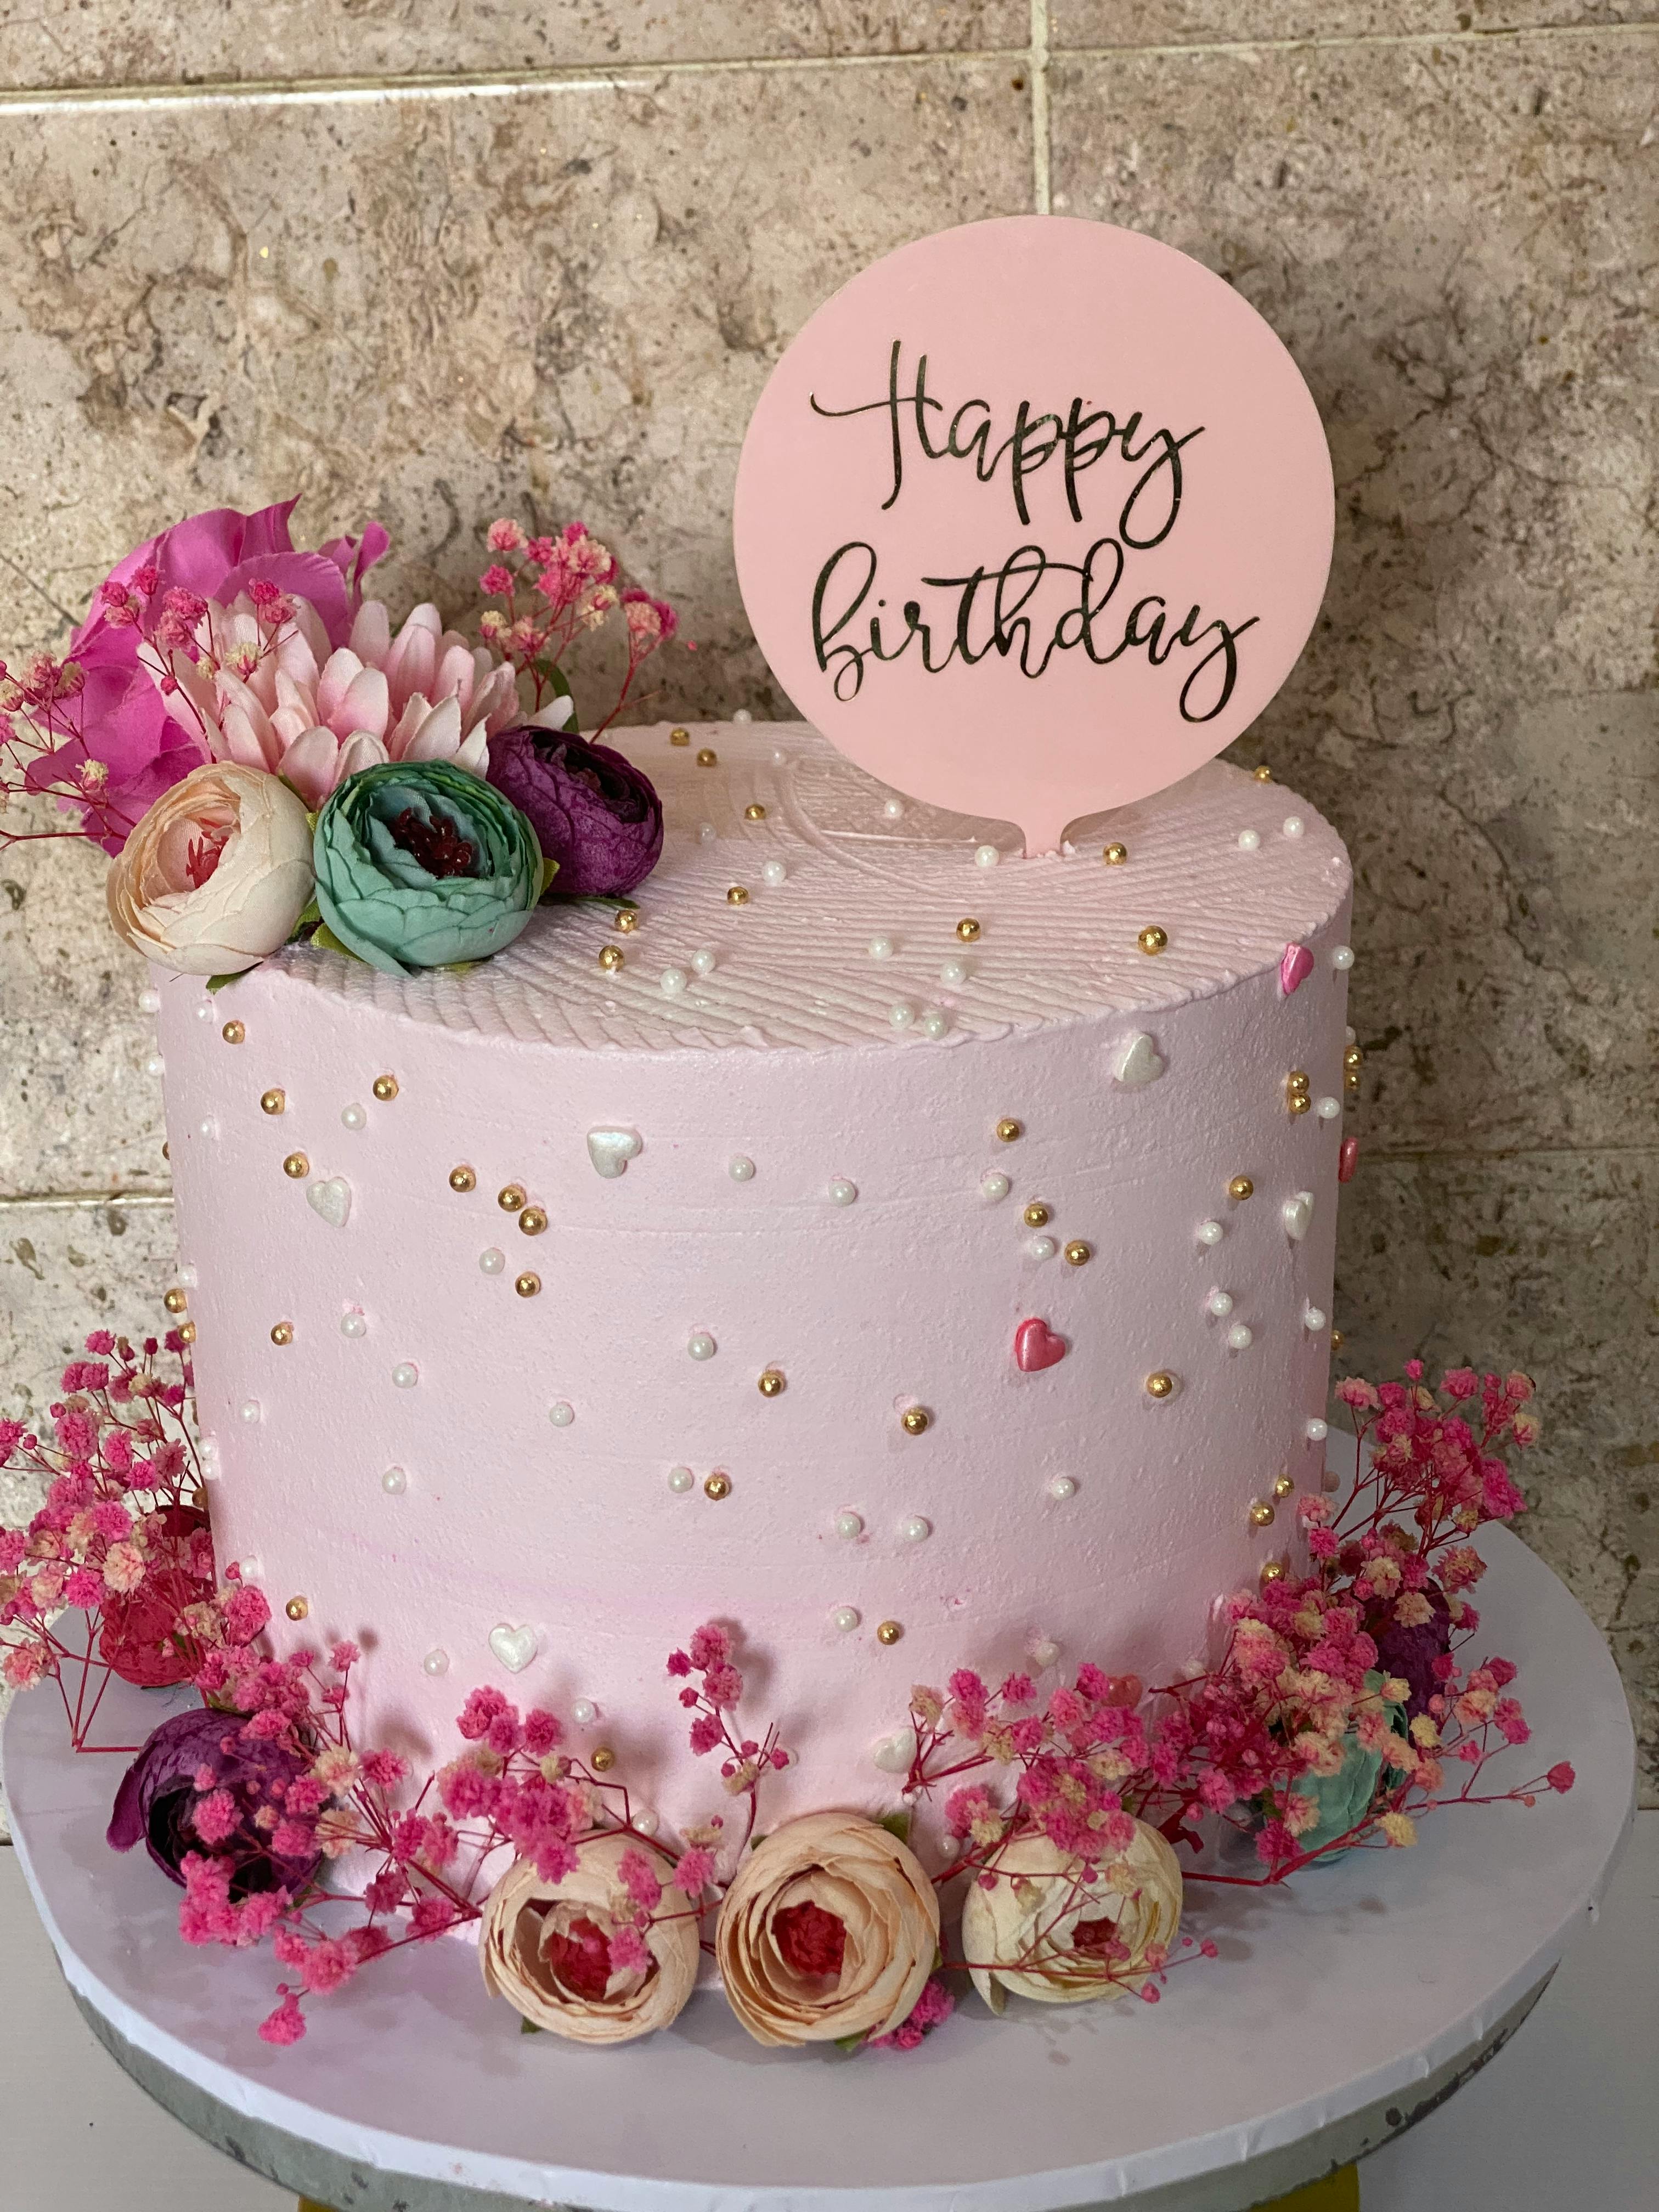 Birthday Cake Topped With Wishes! Free Cakes & Balloons eCards | 123  Greetings